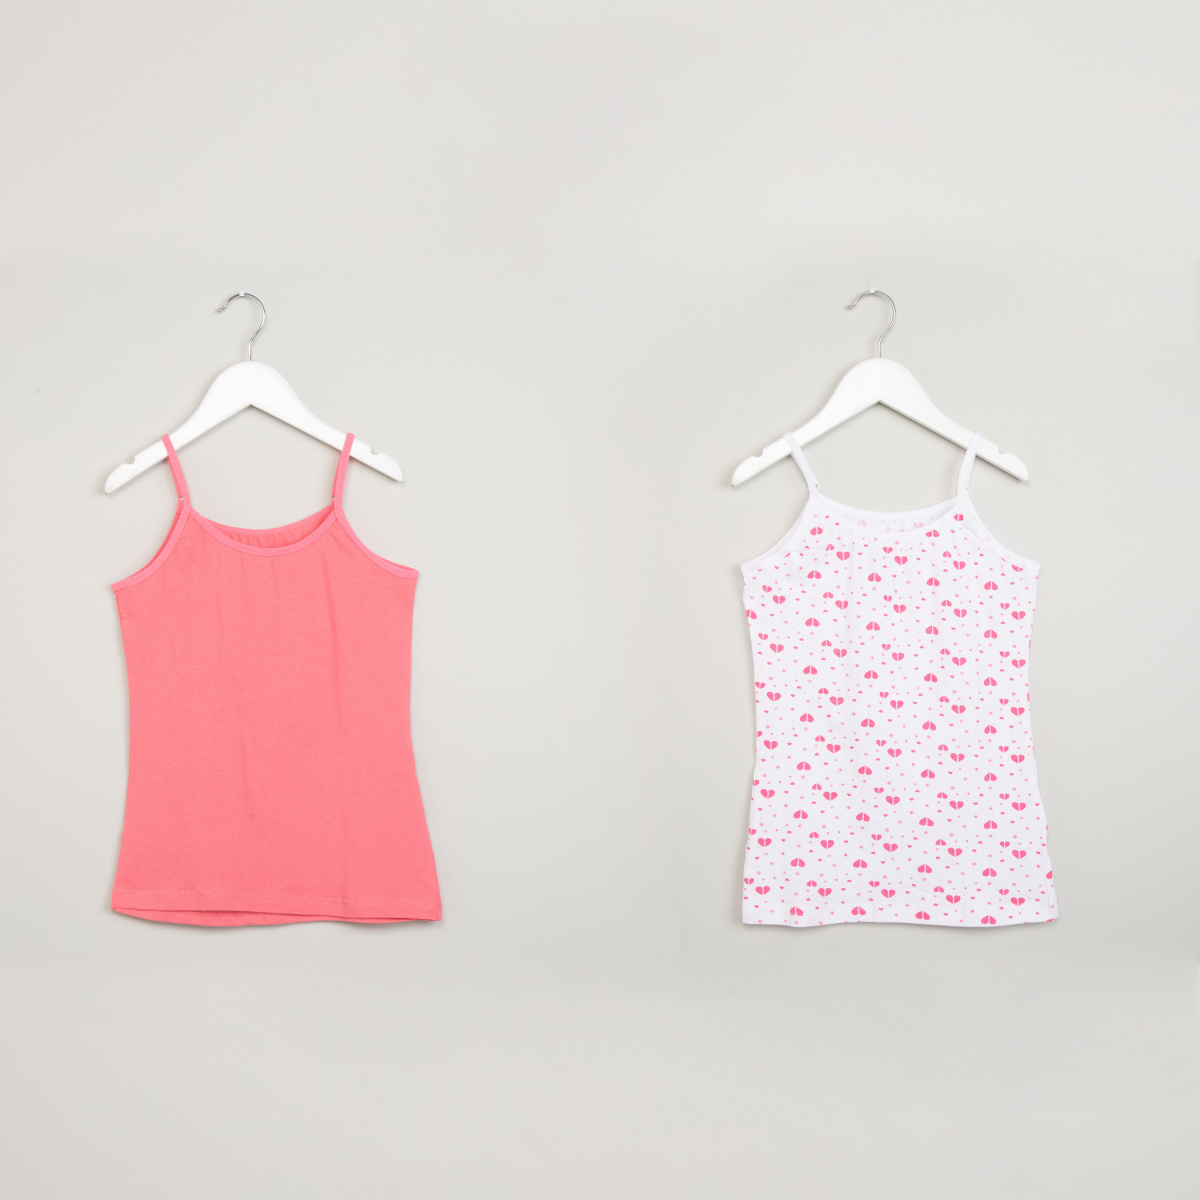 MAX Printed Camisole- Pack of 2 Pcs.